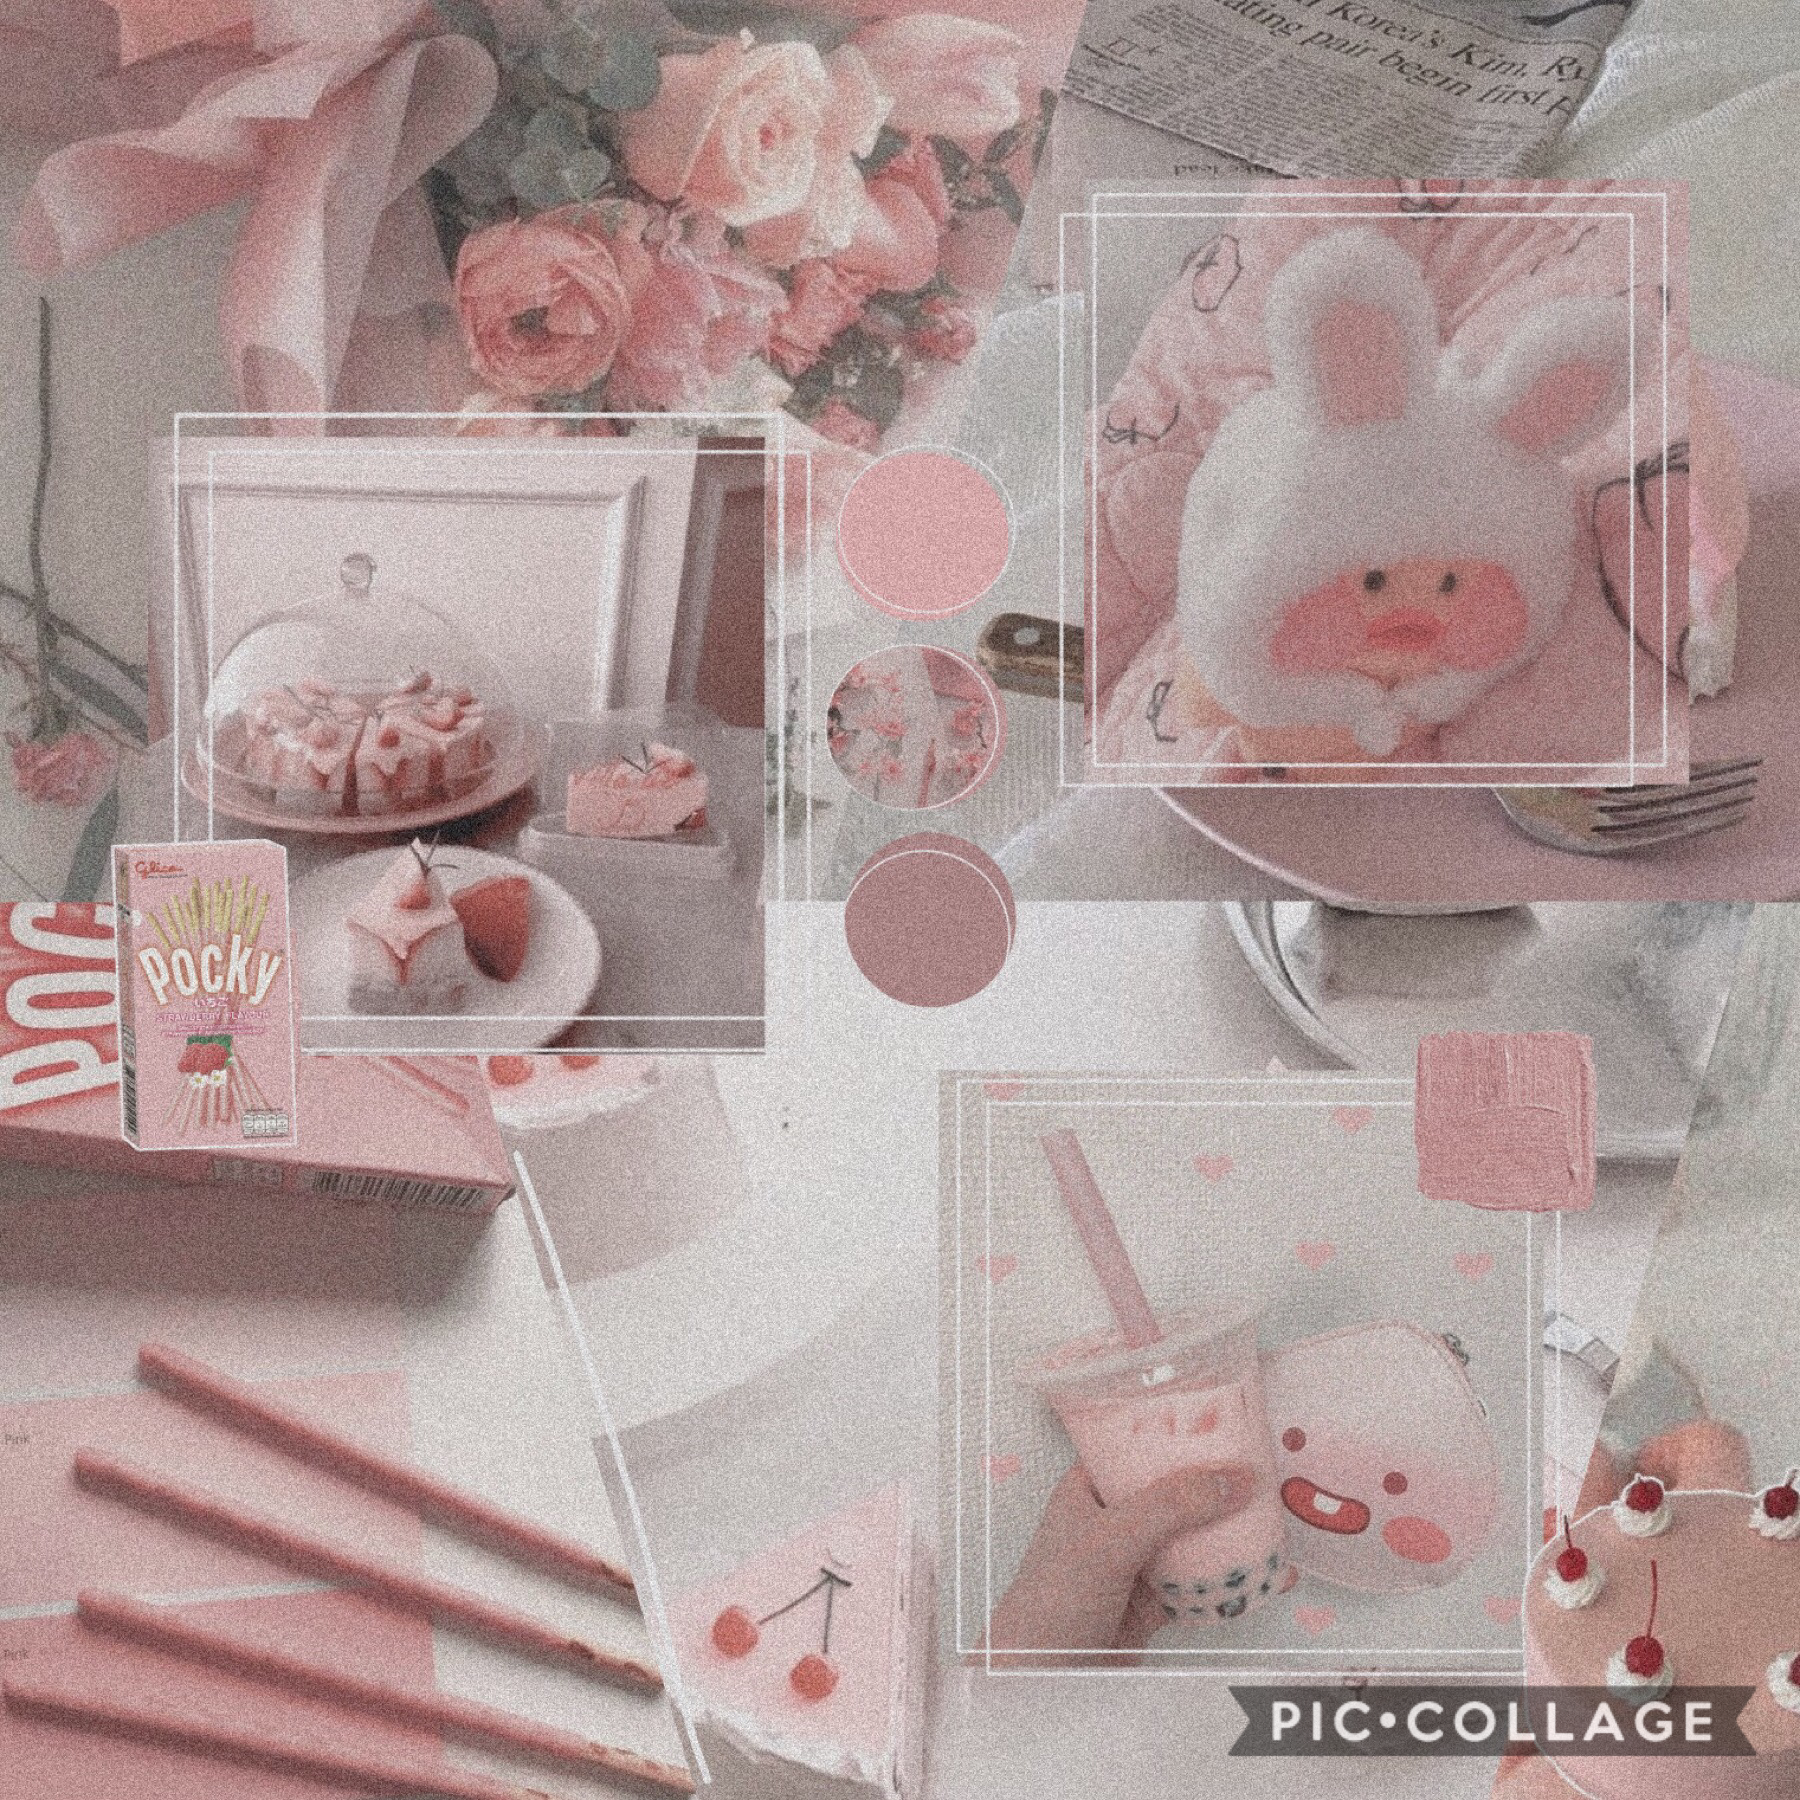 pink blush aesthetic! I’m feeling kinda hungry after making this lol